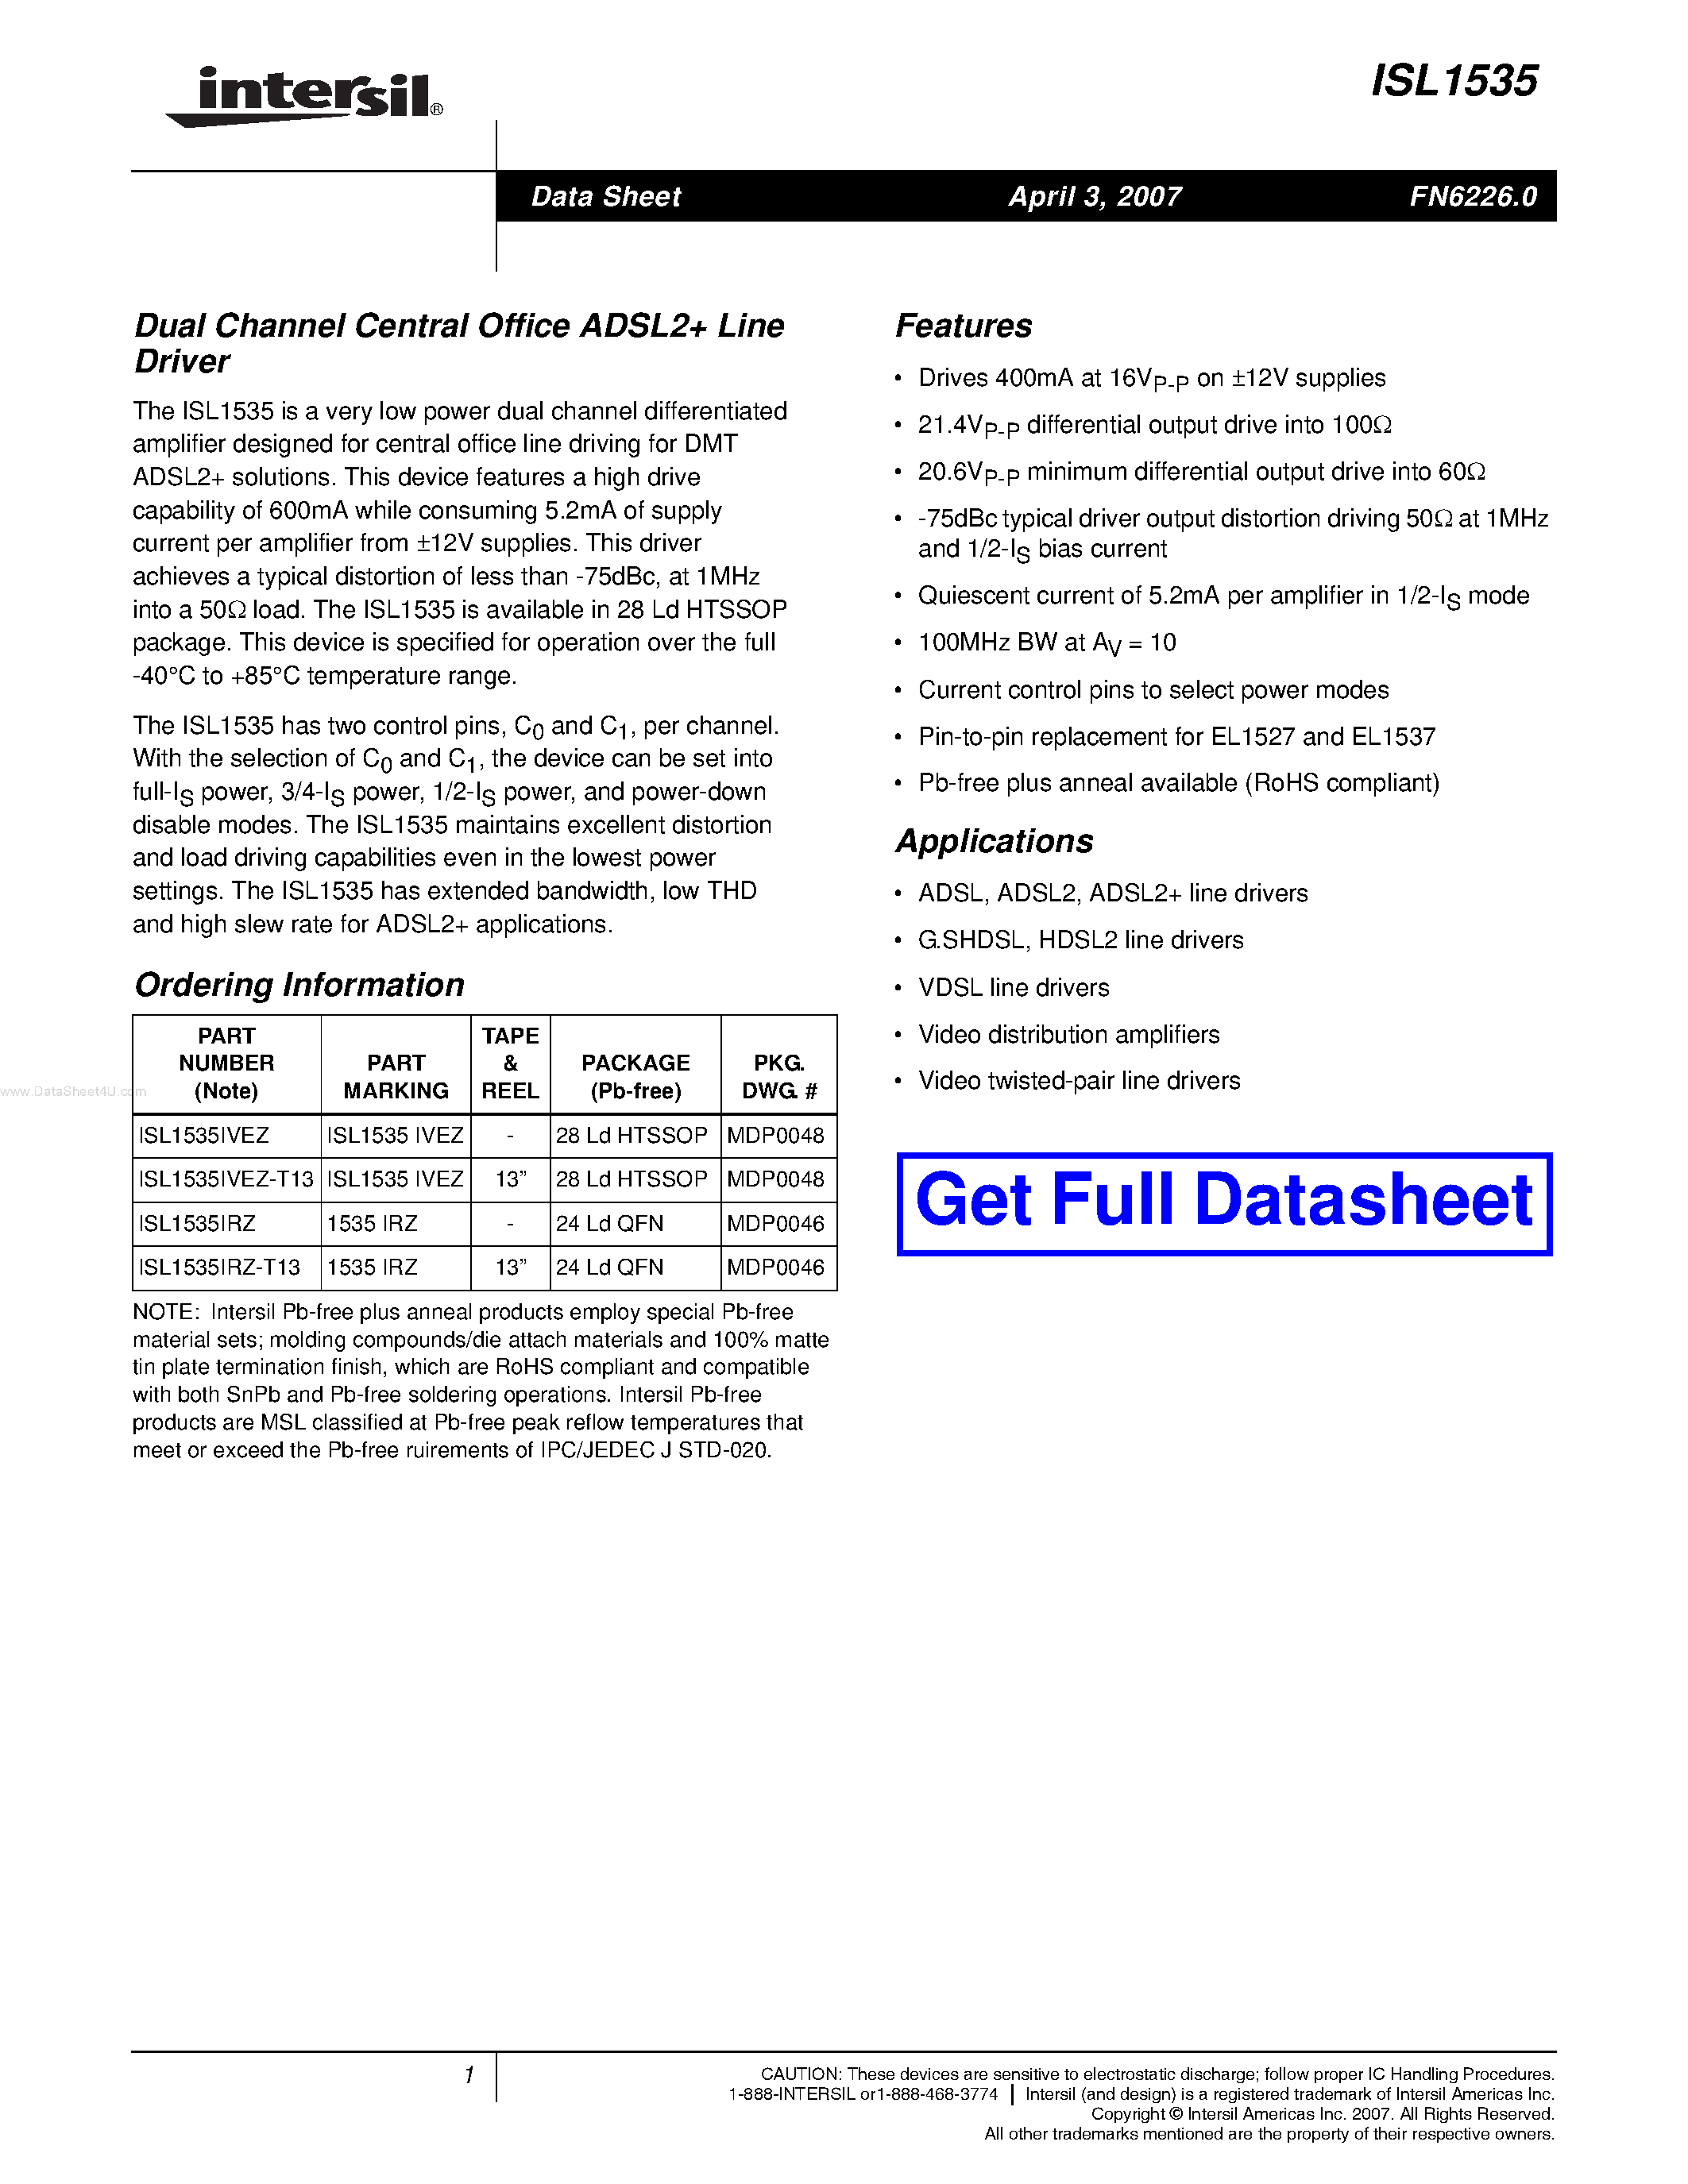 Datasheet ISL1535 - Dual Channel Central Office ADSL2 Line Driver page 1